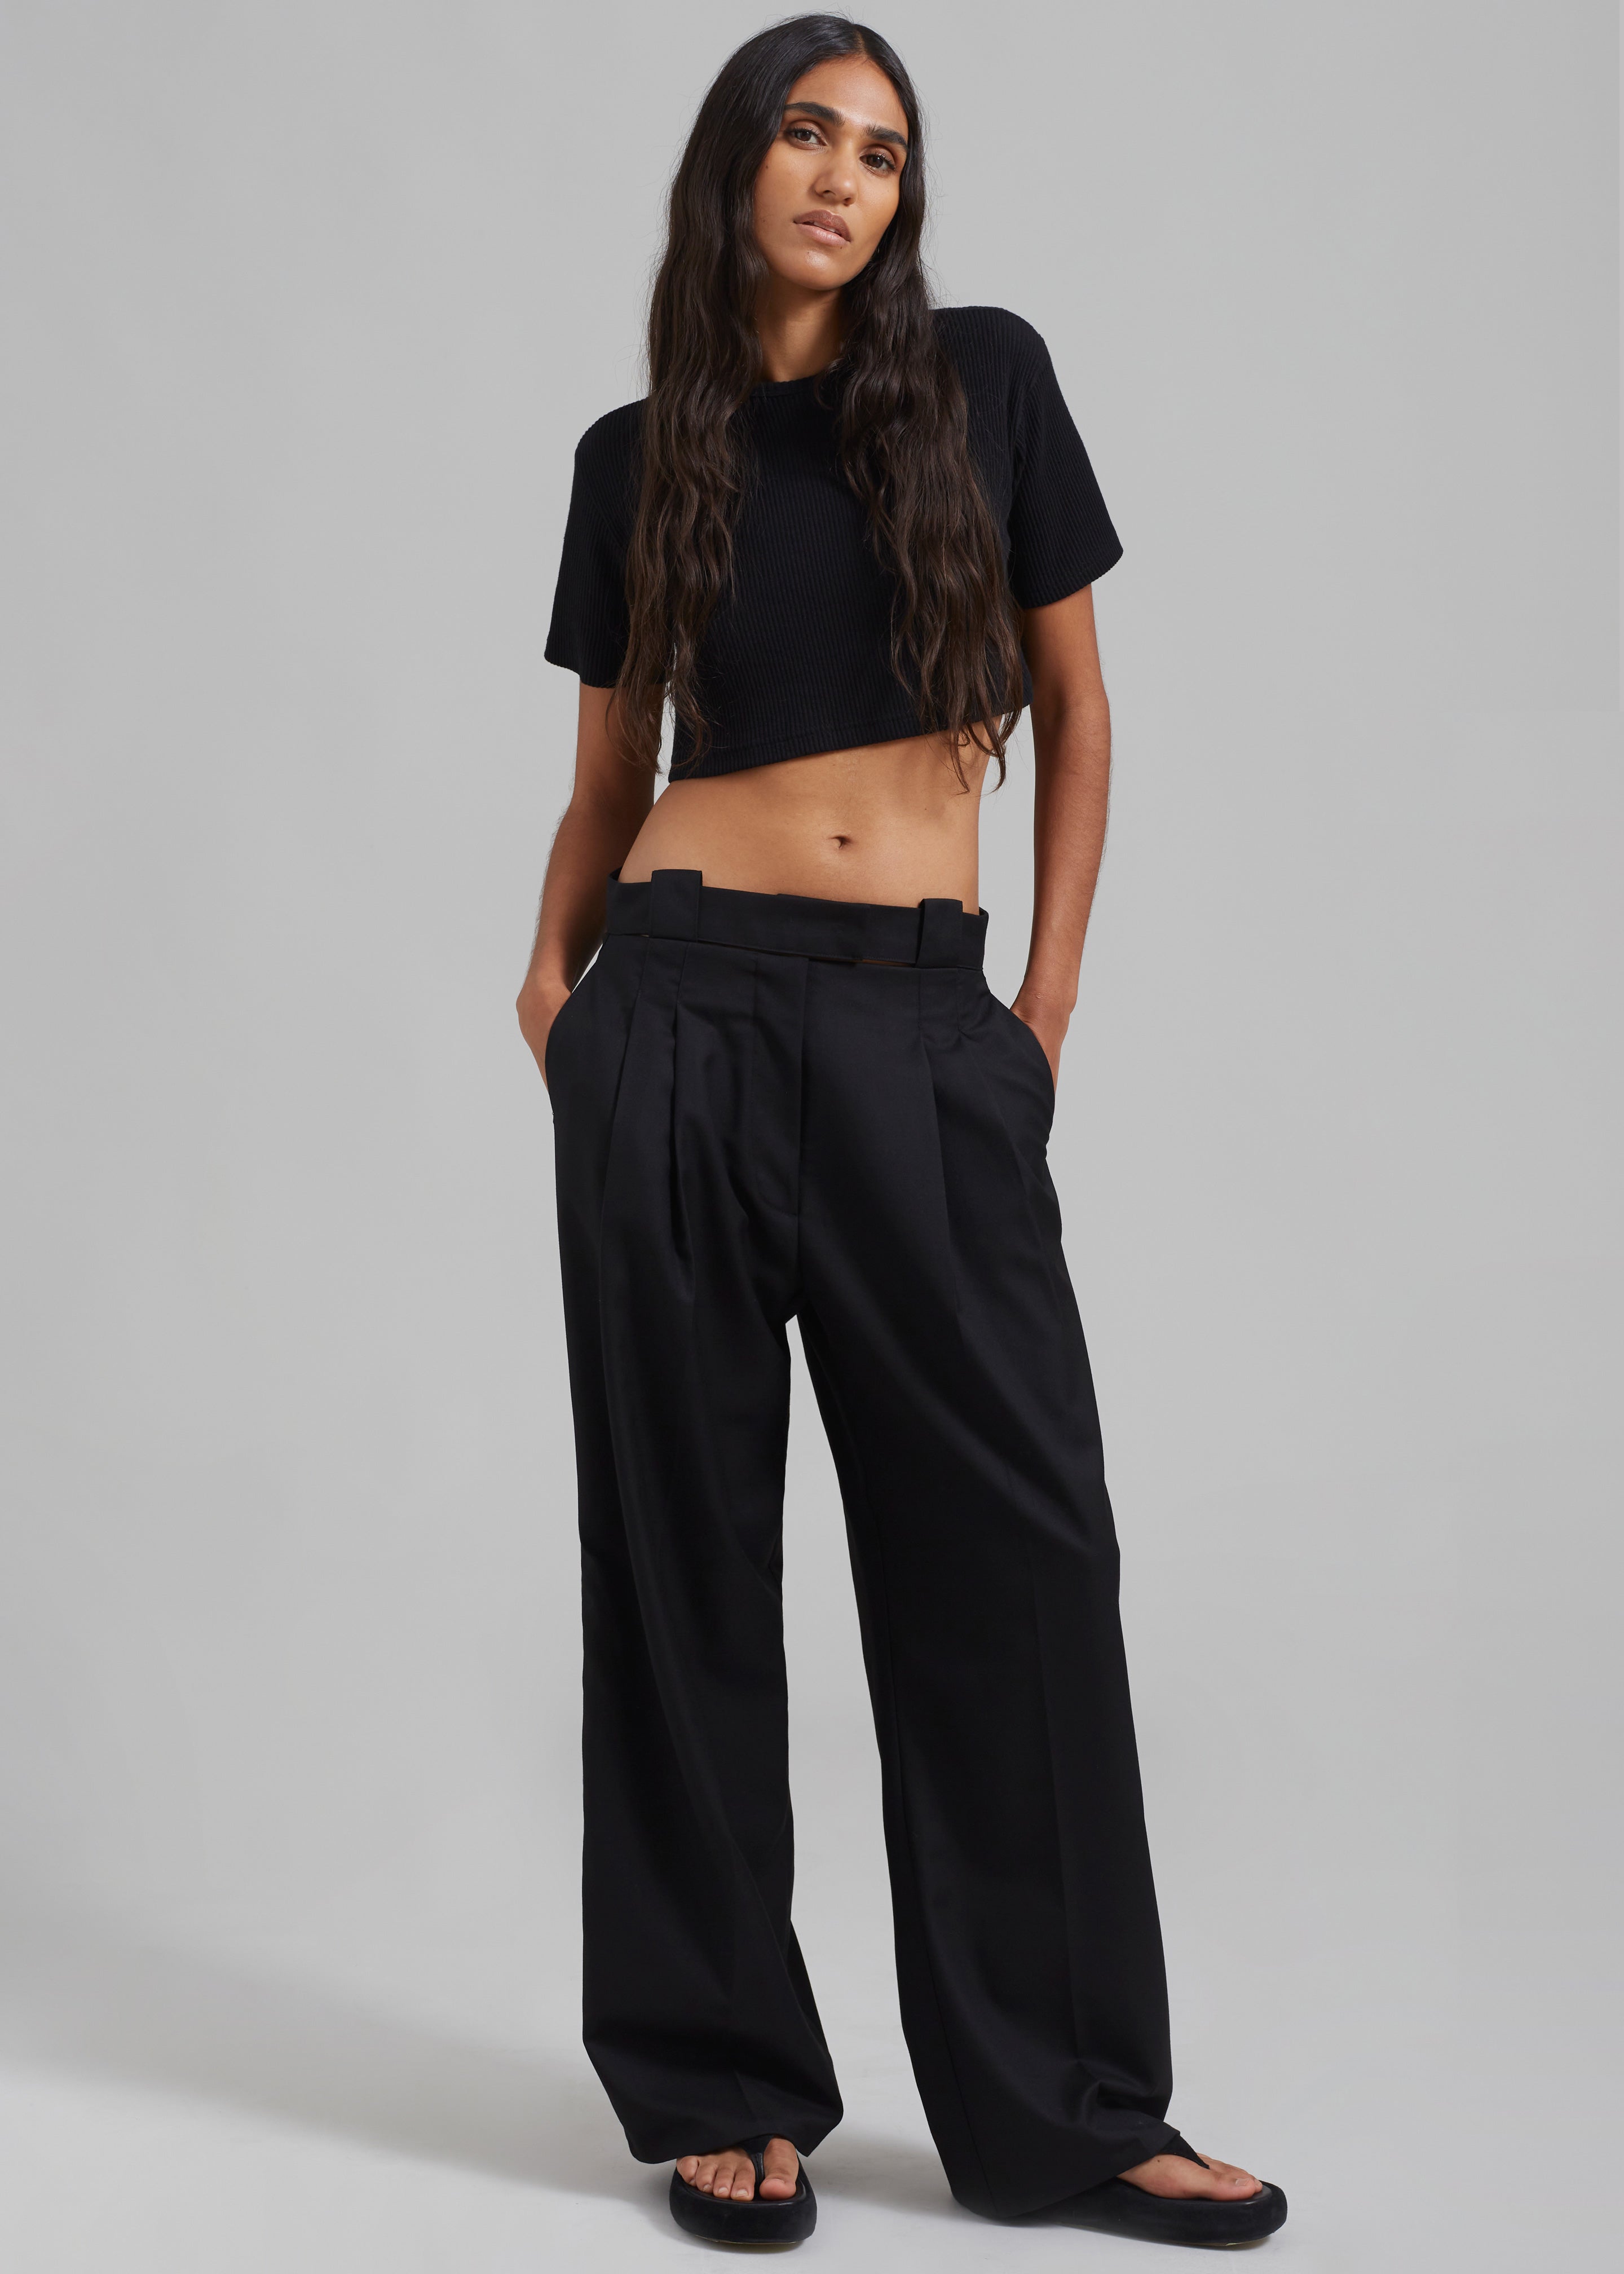 The Frankie Shop Tate Trousers - Black